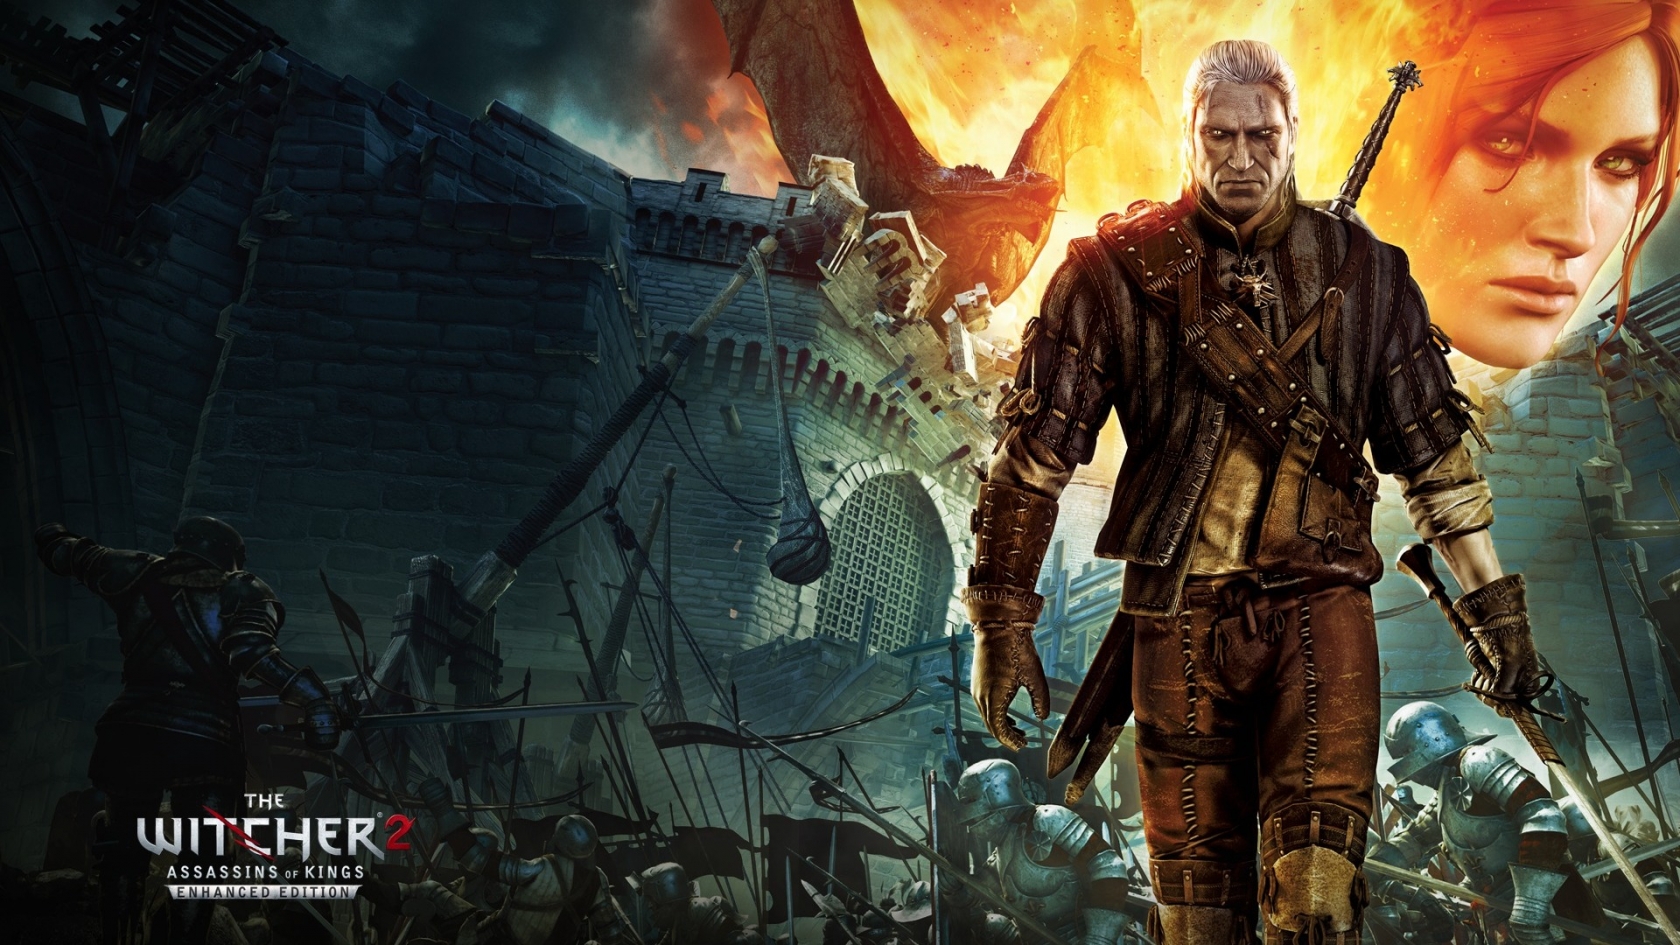 The Witcher 2 Assassins of Kings PC Game for 1680 x 945 HDTV resolution